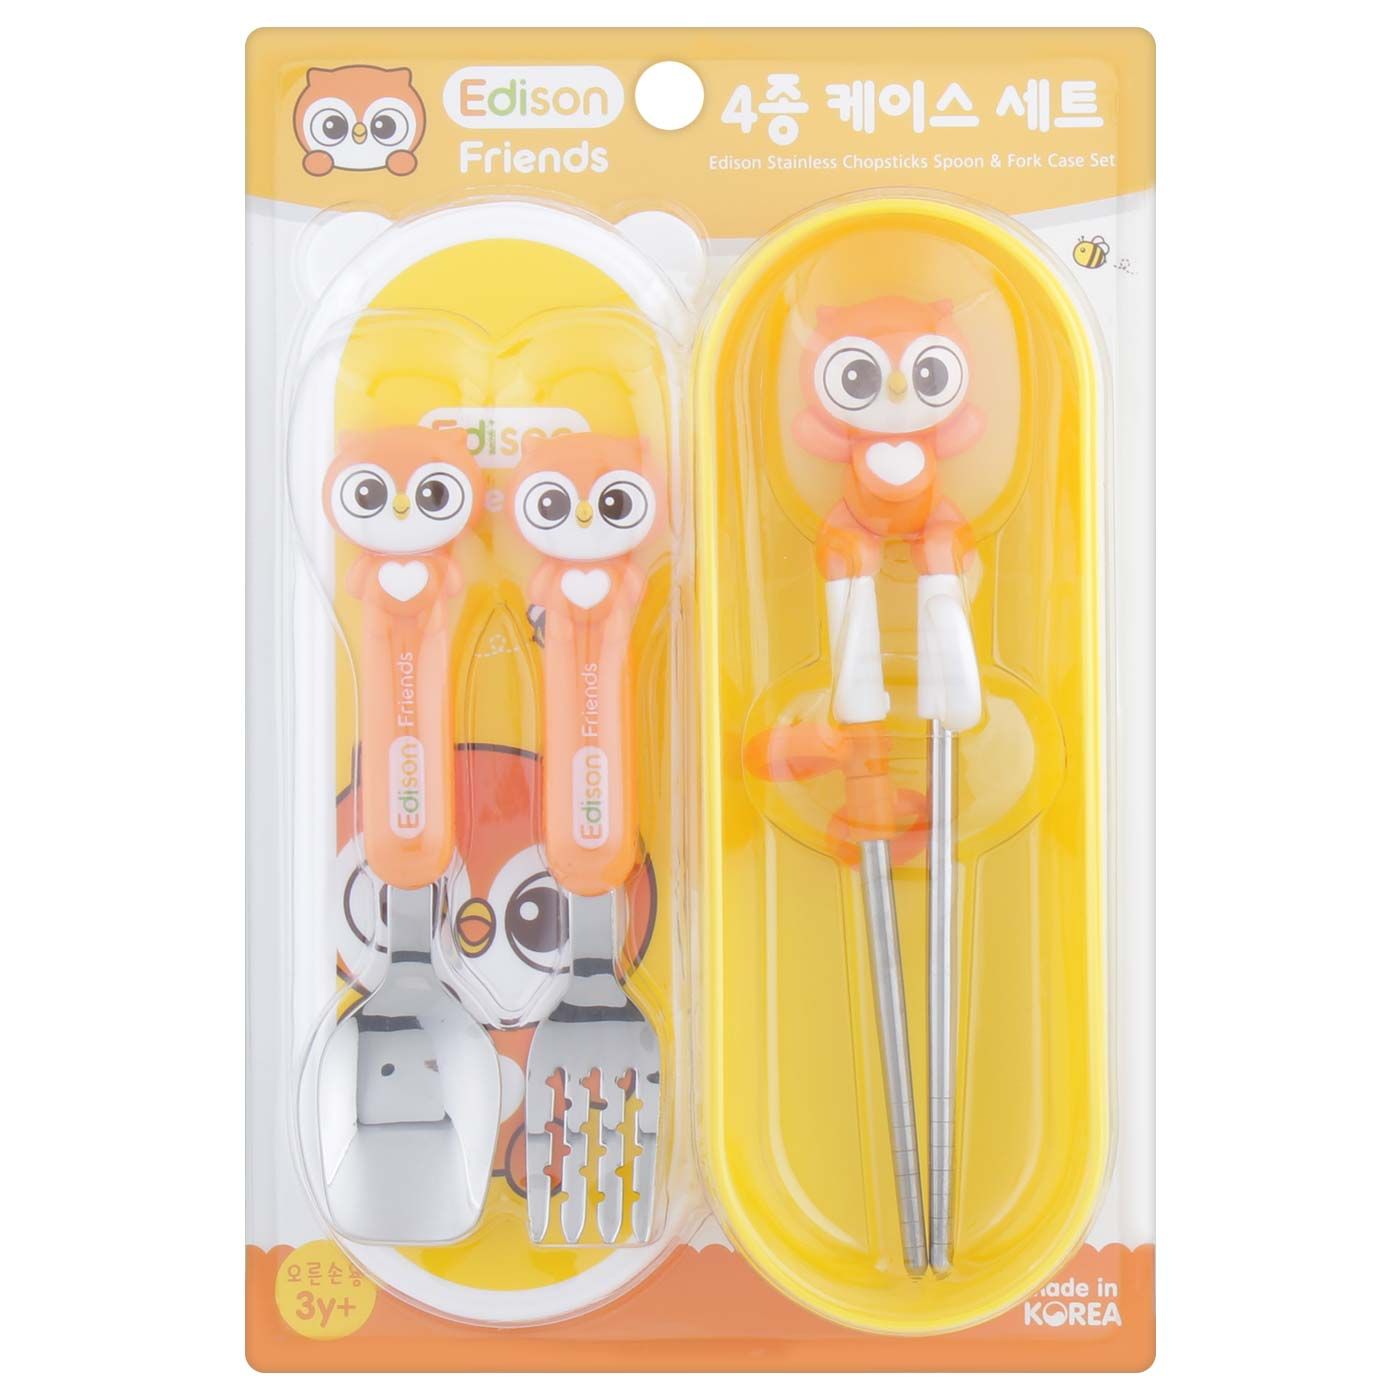 Edison Stainless Chopstick with Spoon Fork Case Owl Set - 1